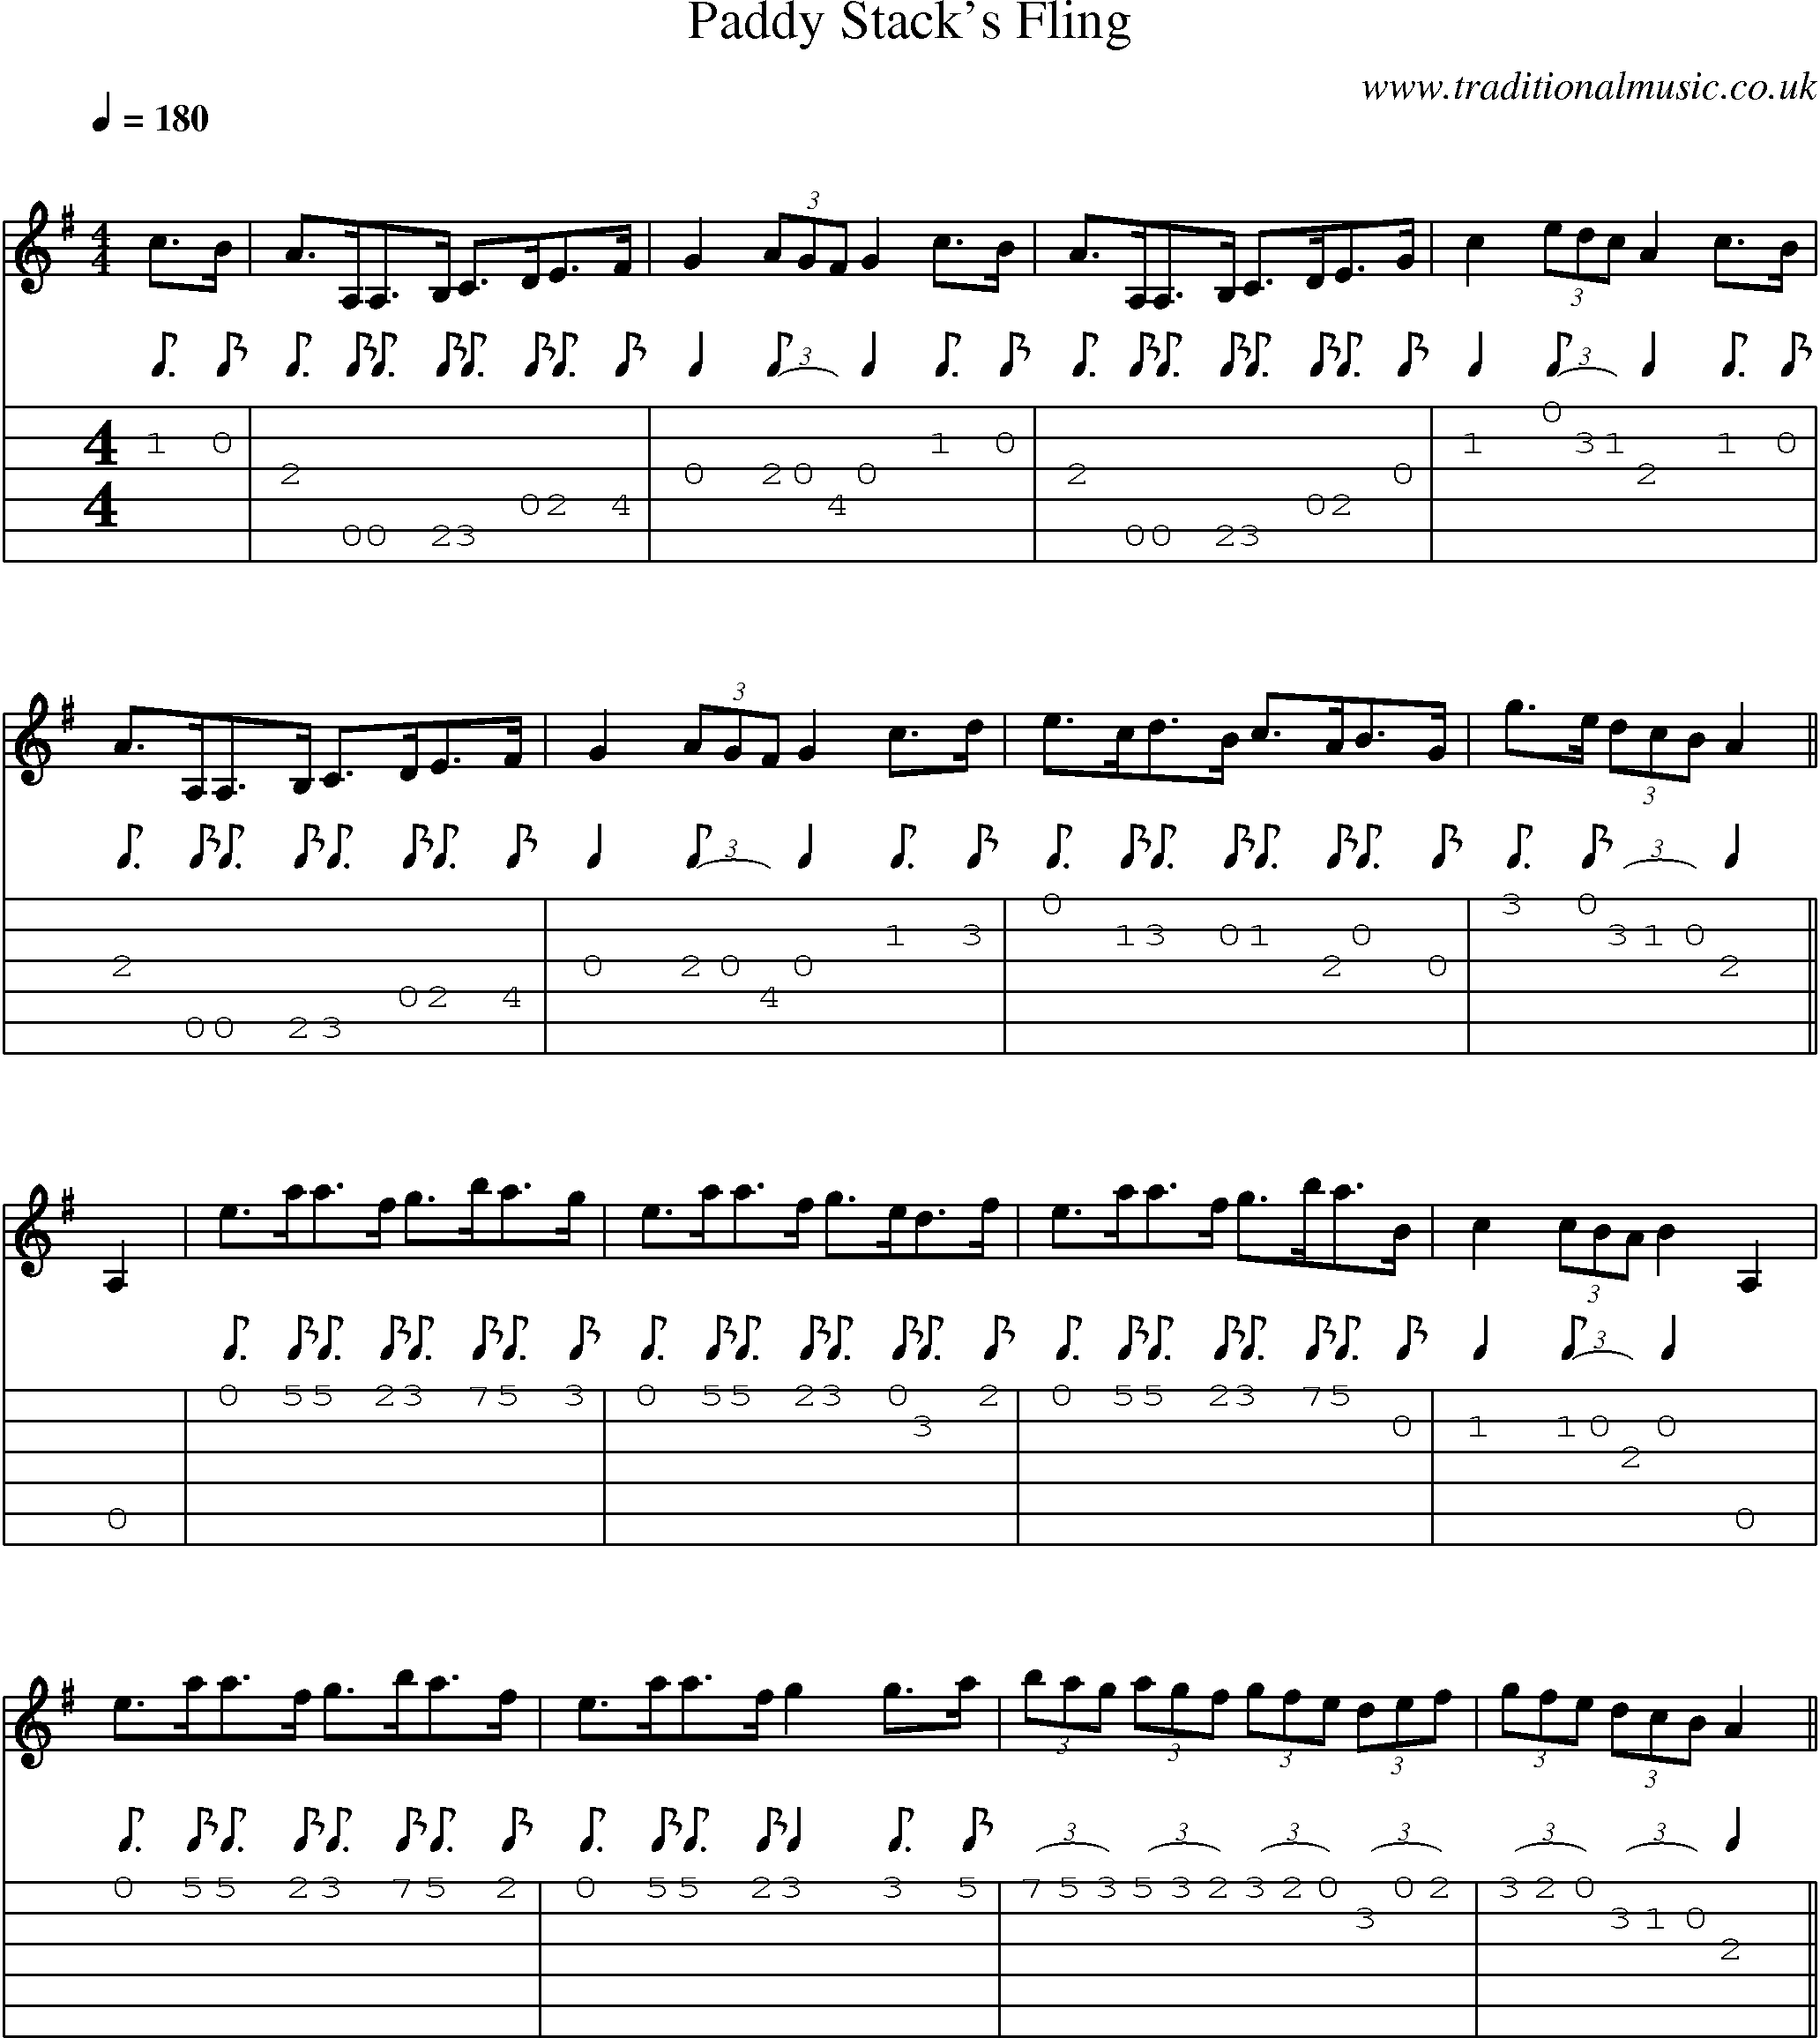 Music Score and Guitar Tabs for Paddy Stacks Fling